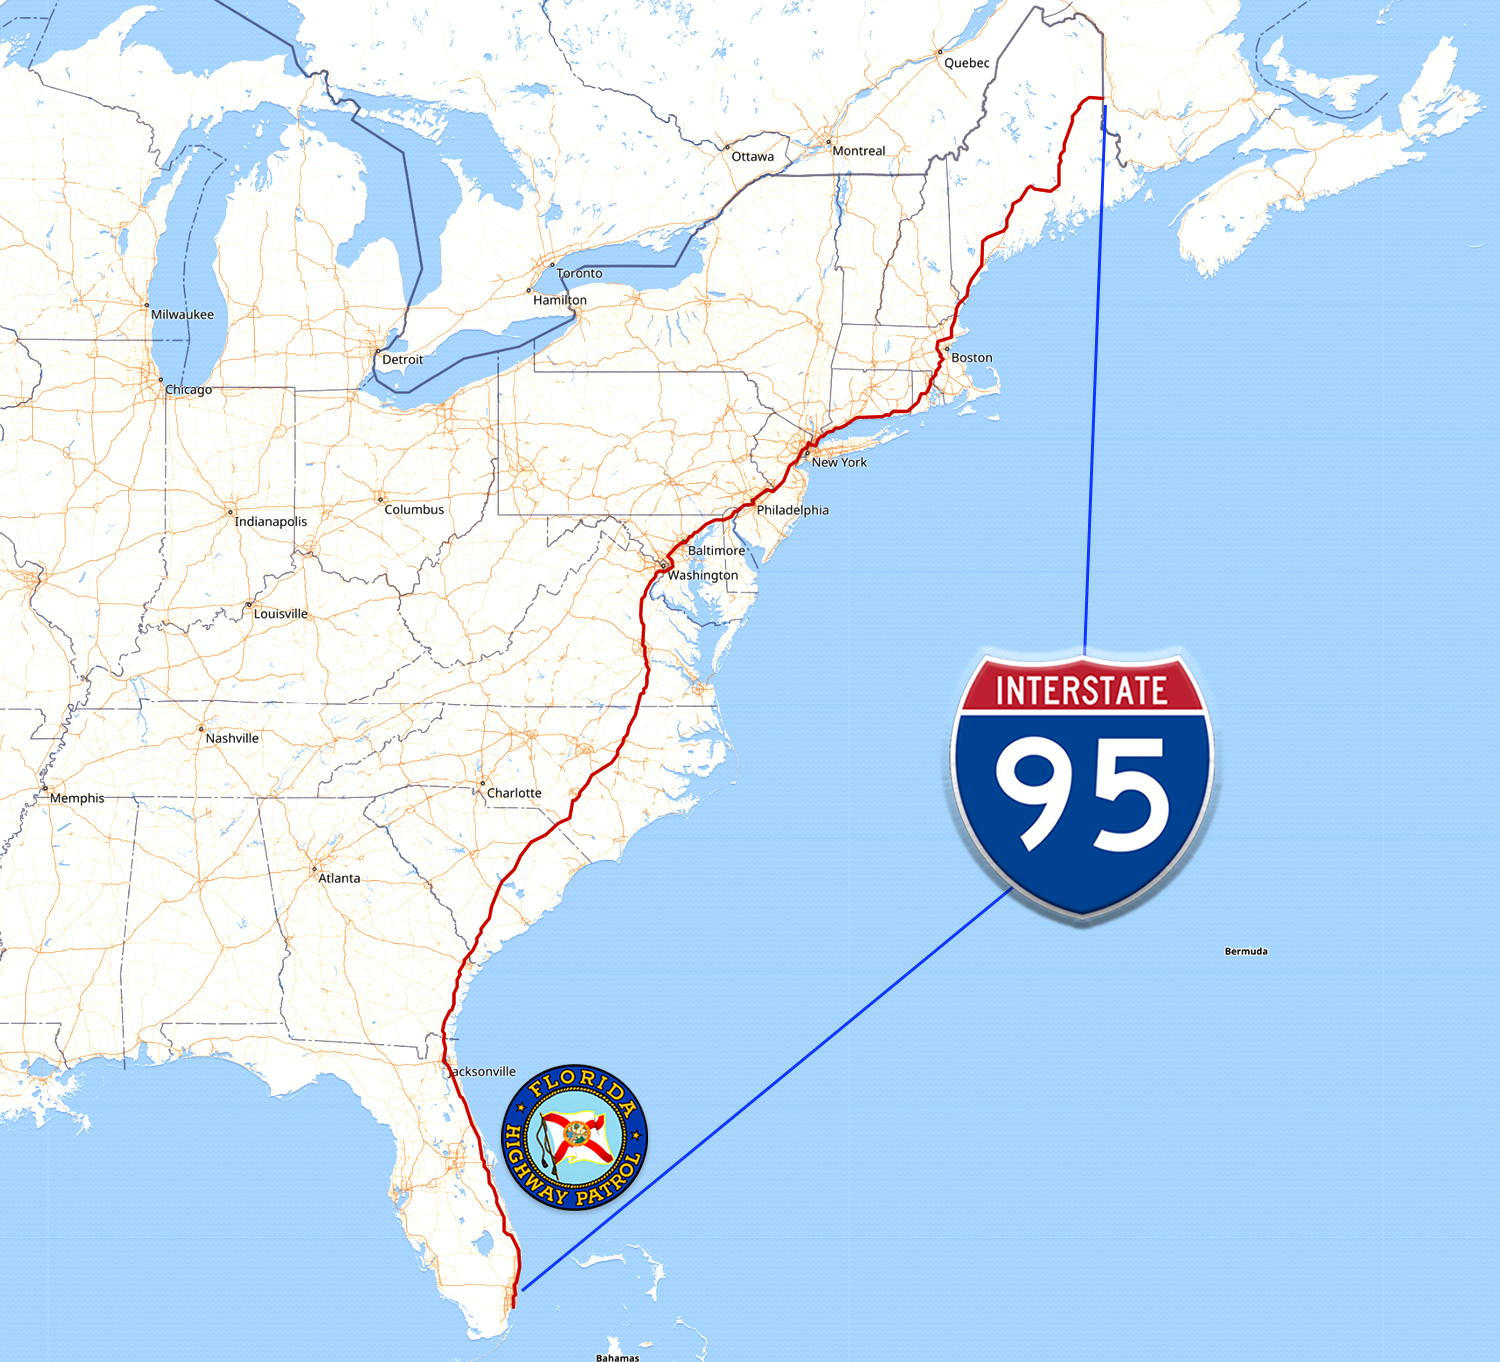 Map of the US East Coast highlighting I-95